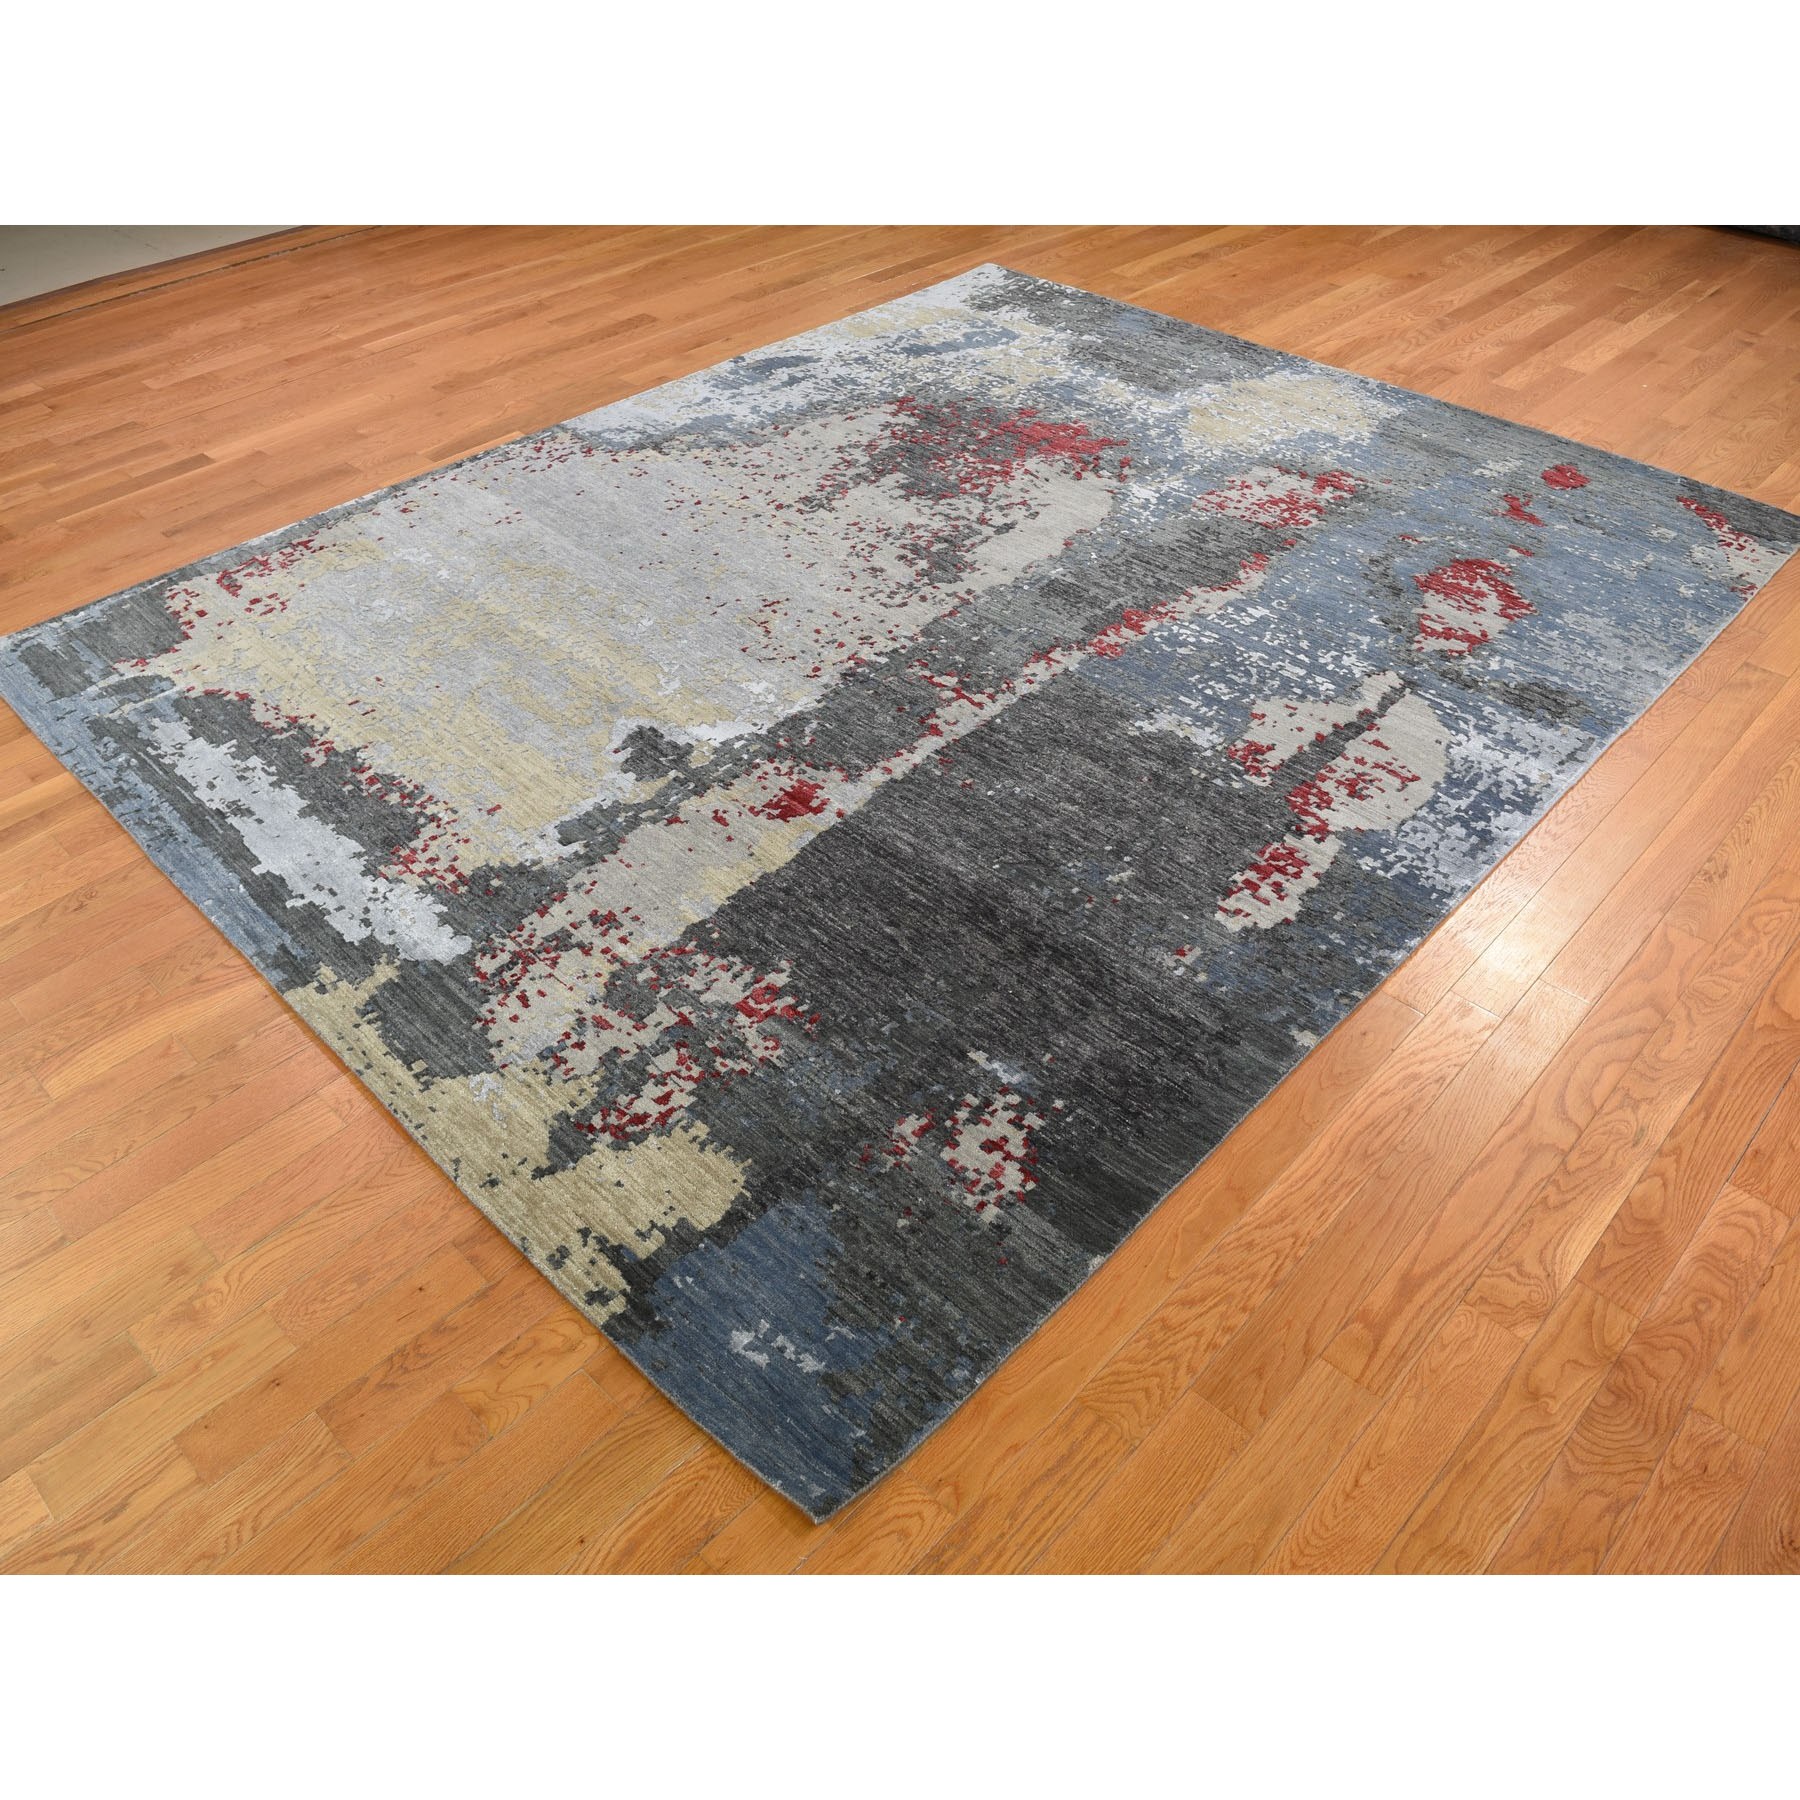 8-x10-1  Black Abstract Design Wool and Silk Hi-Low Pile Tight Knot Hand Knotted Oriental Rug 